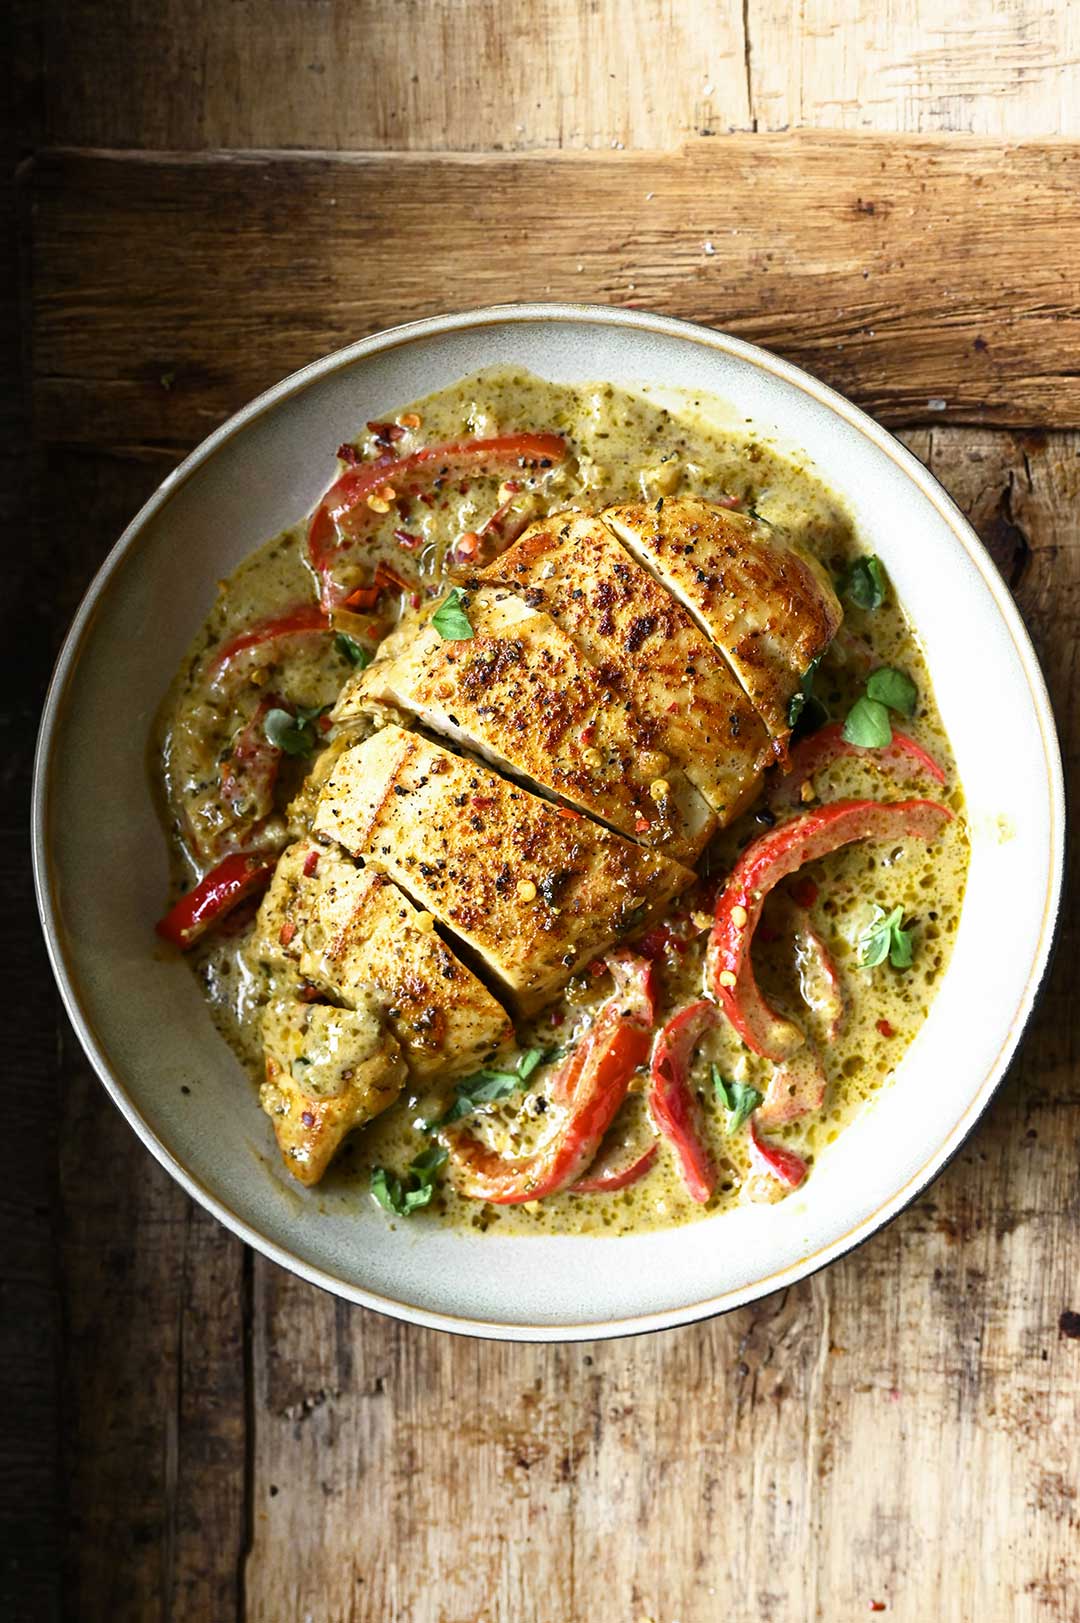 pesto chicken with peppers